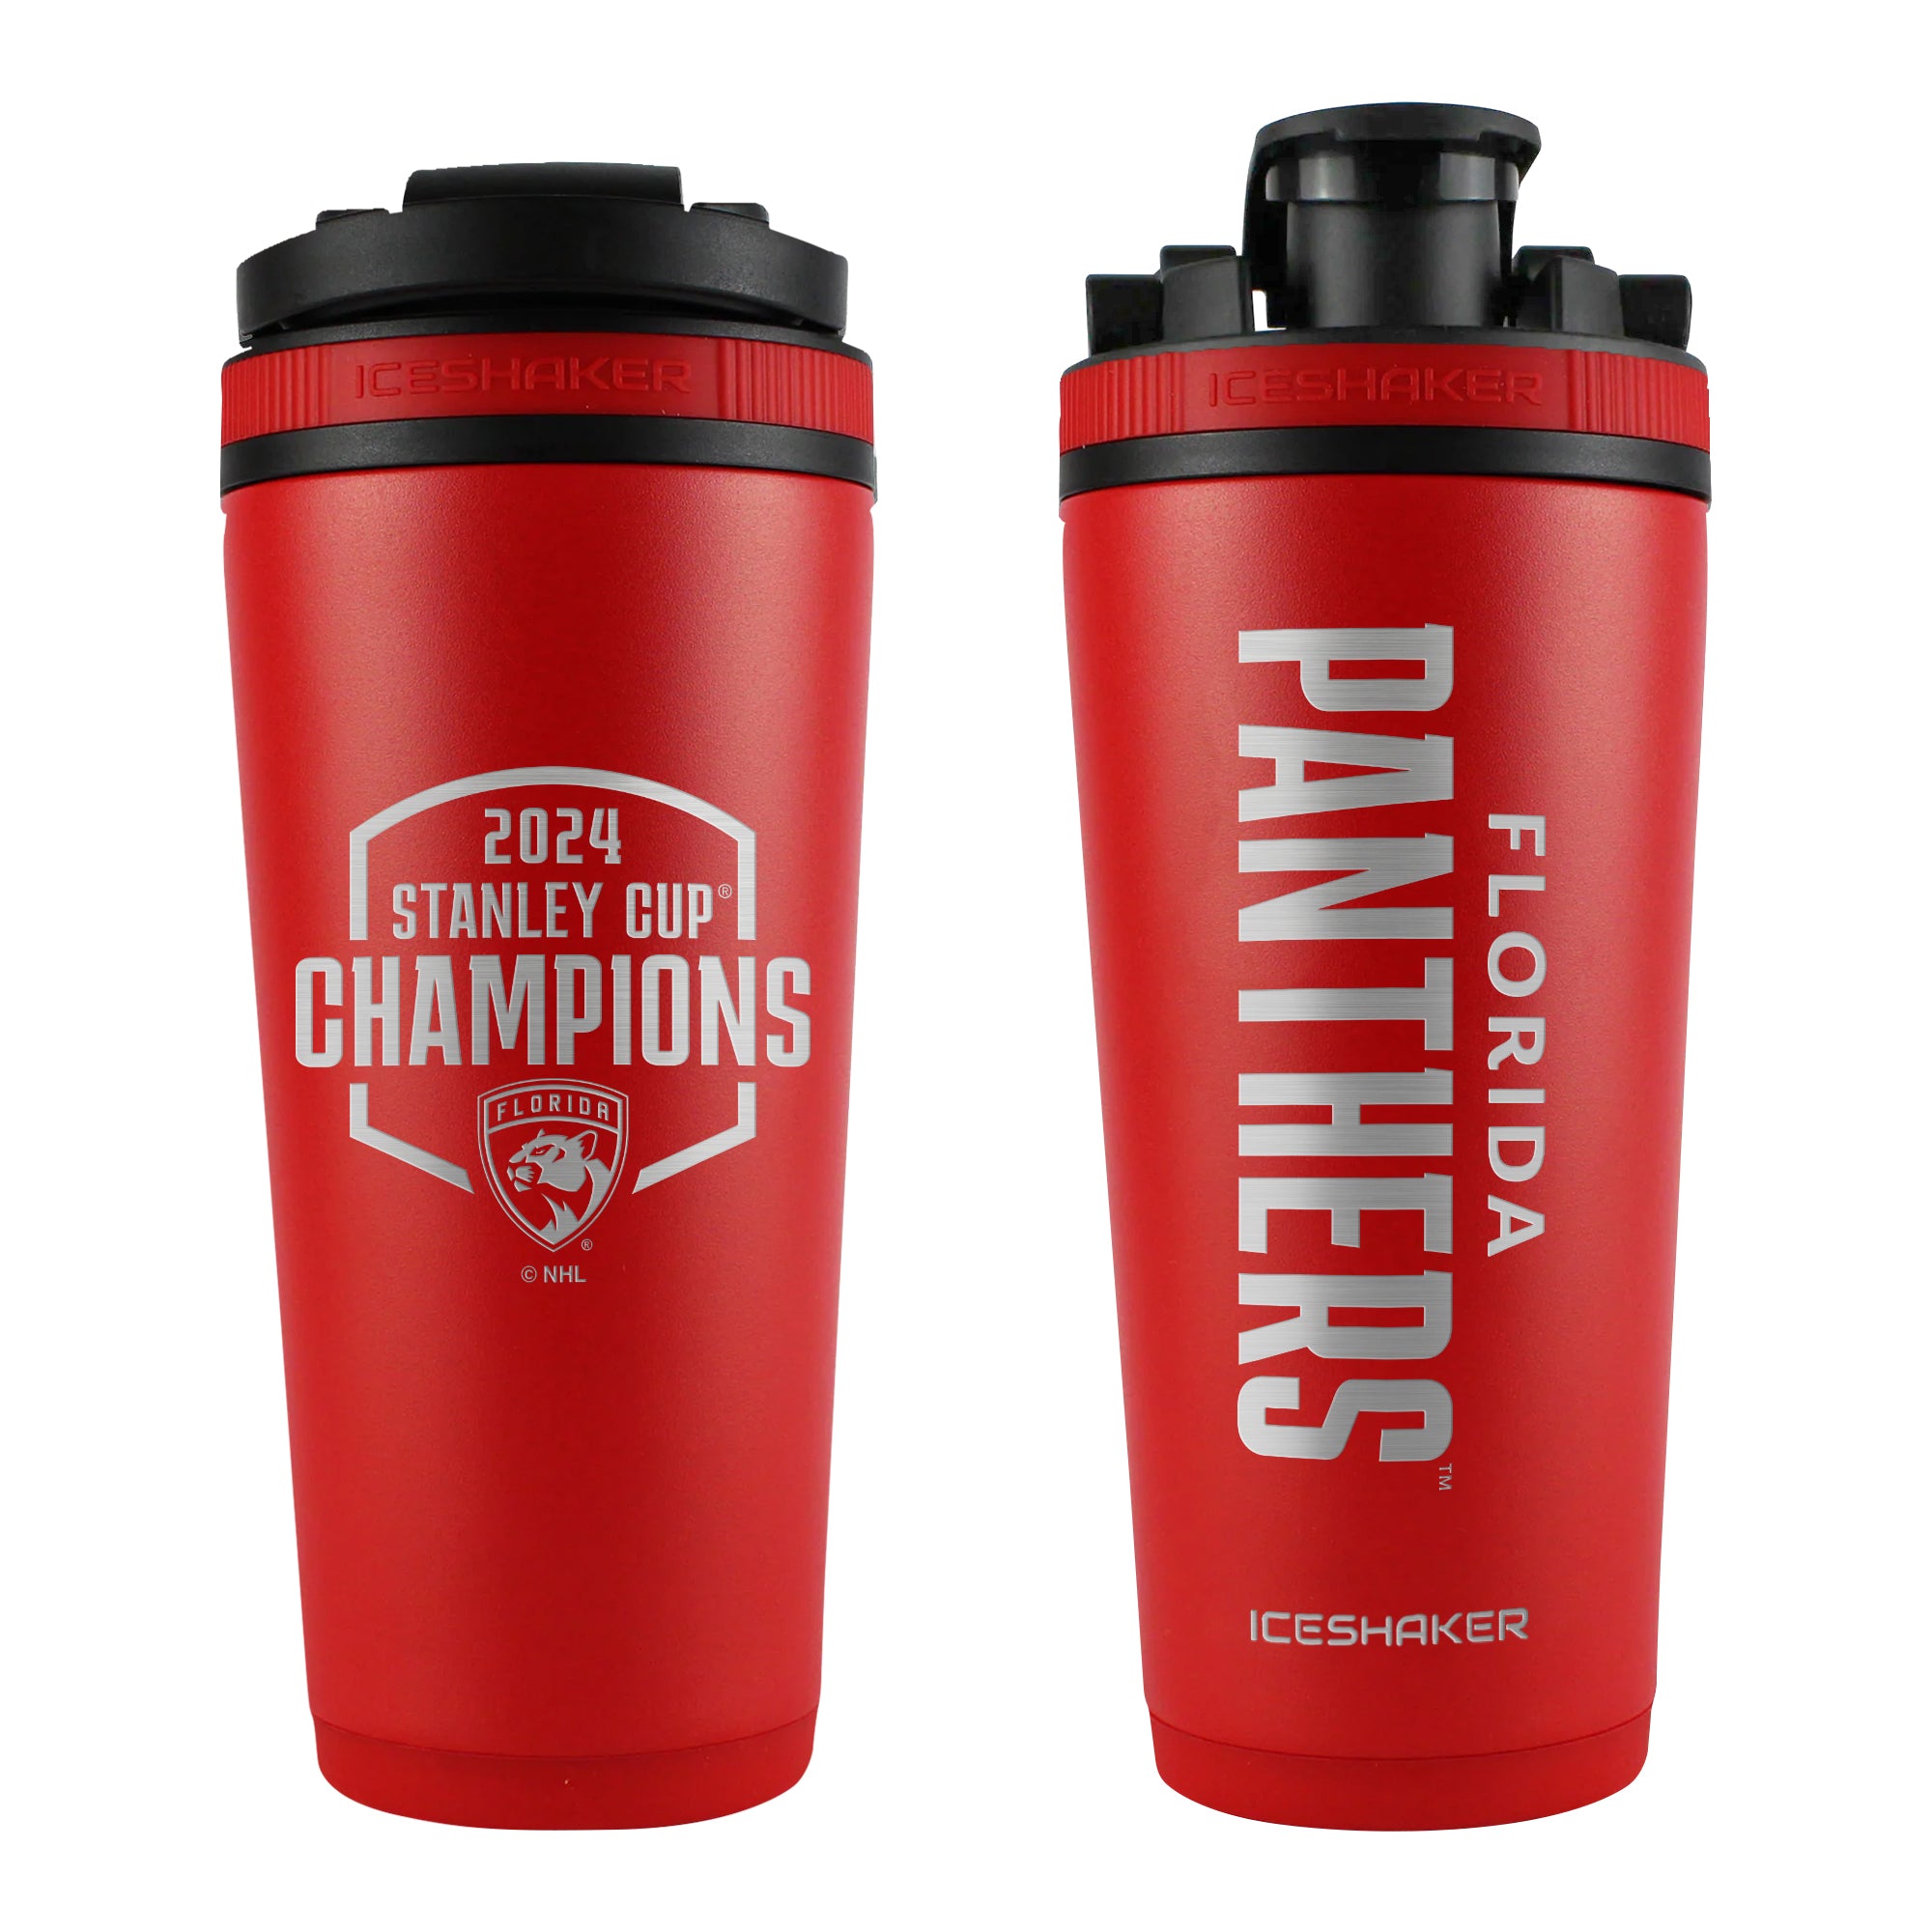 Florida Panthers 2024 Stanley Cup Champions Ice Shaker Tumbler - 26oz